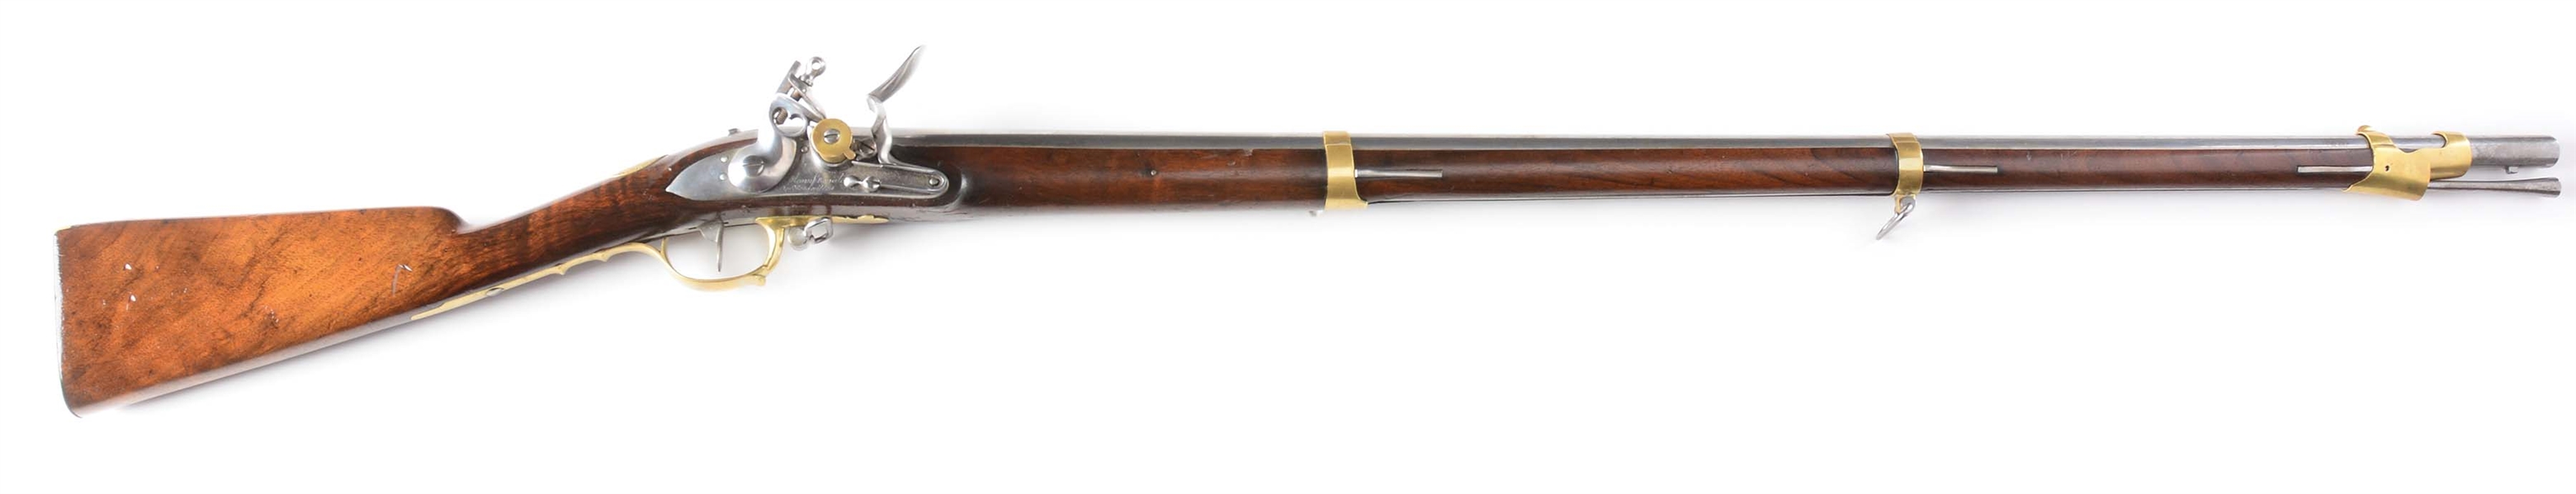 (A) EXTREMELY RARE FRENCH FLINTLOCK MUSKET BY THE VERSAILLES MANUFACTORY EXCLUSIVELY FOR THE GARDES DU CORPS DE MONSIEUR WITH UNIQUE ROTATING FLASHPAN COVER.